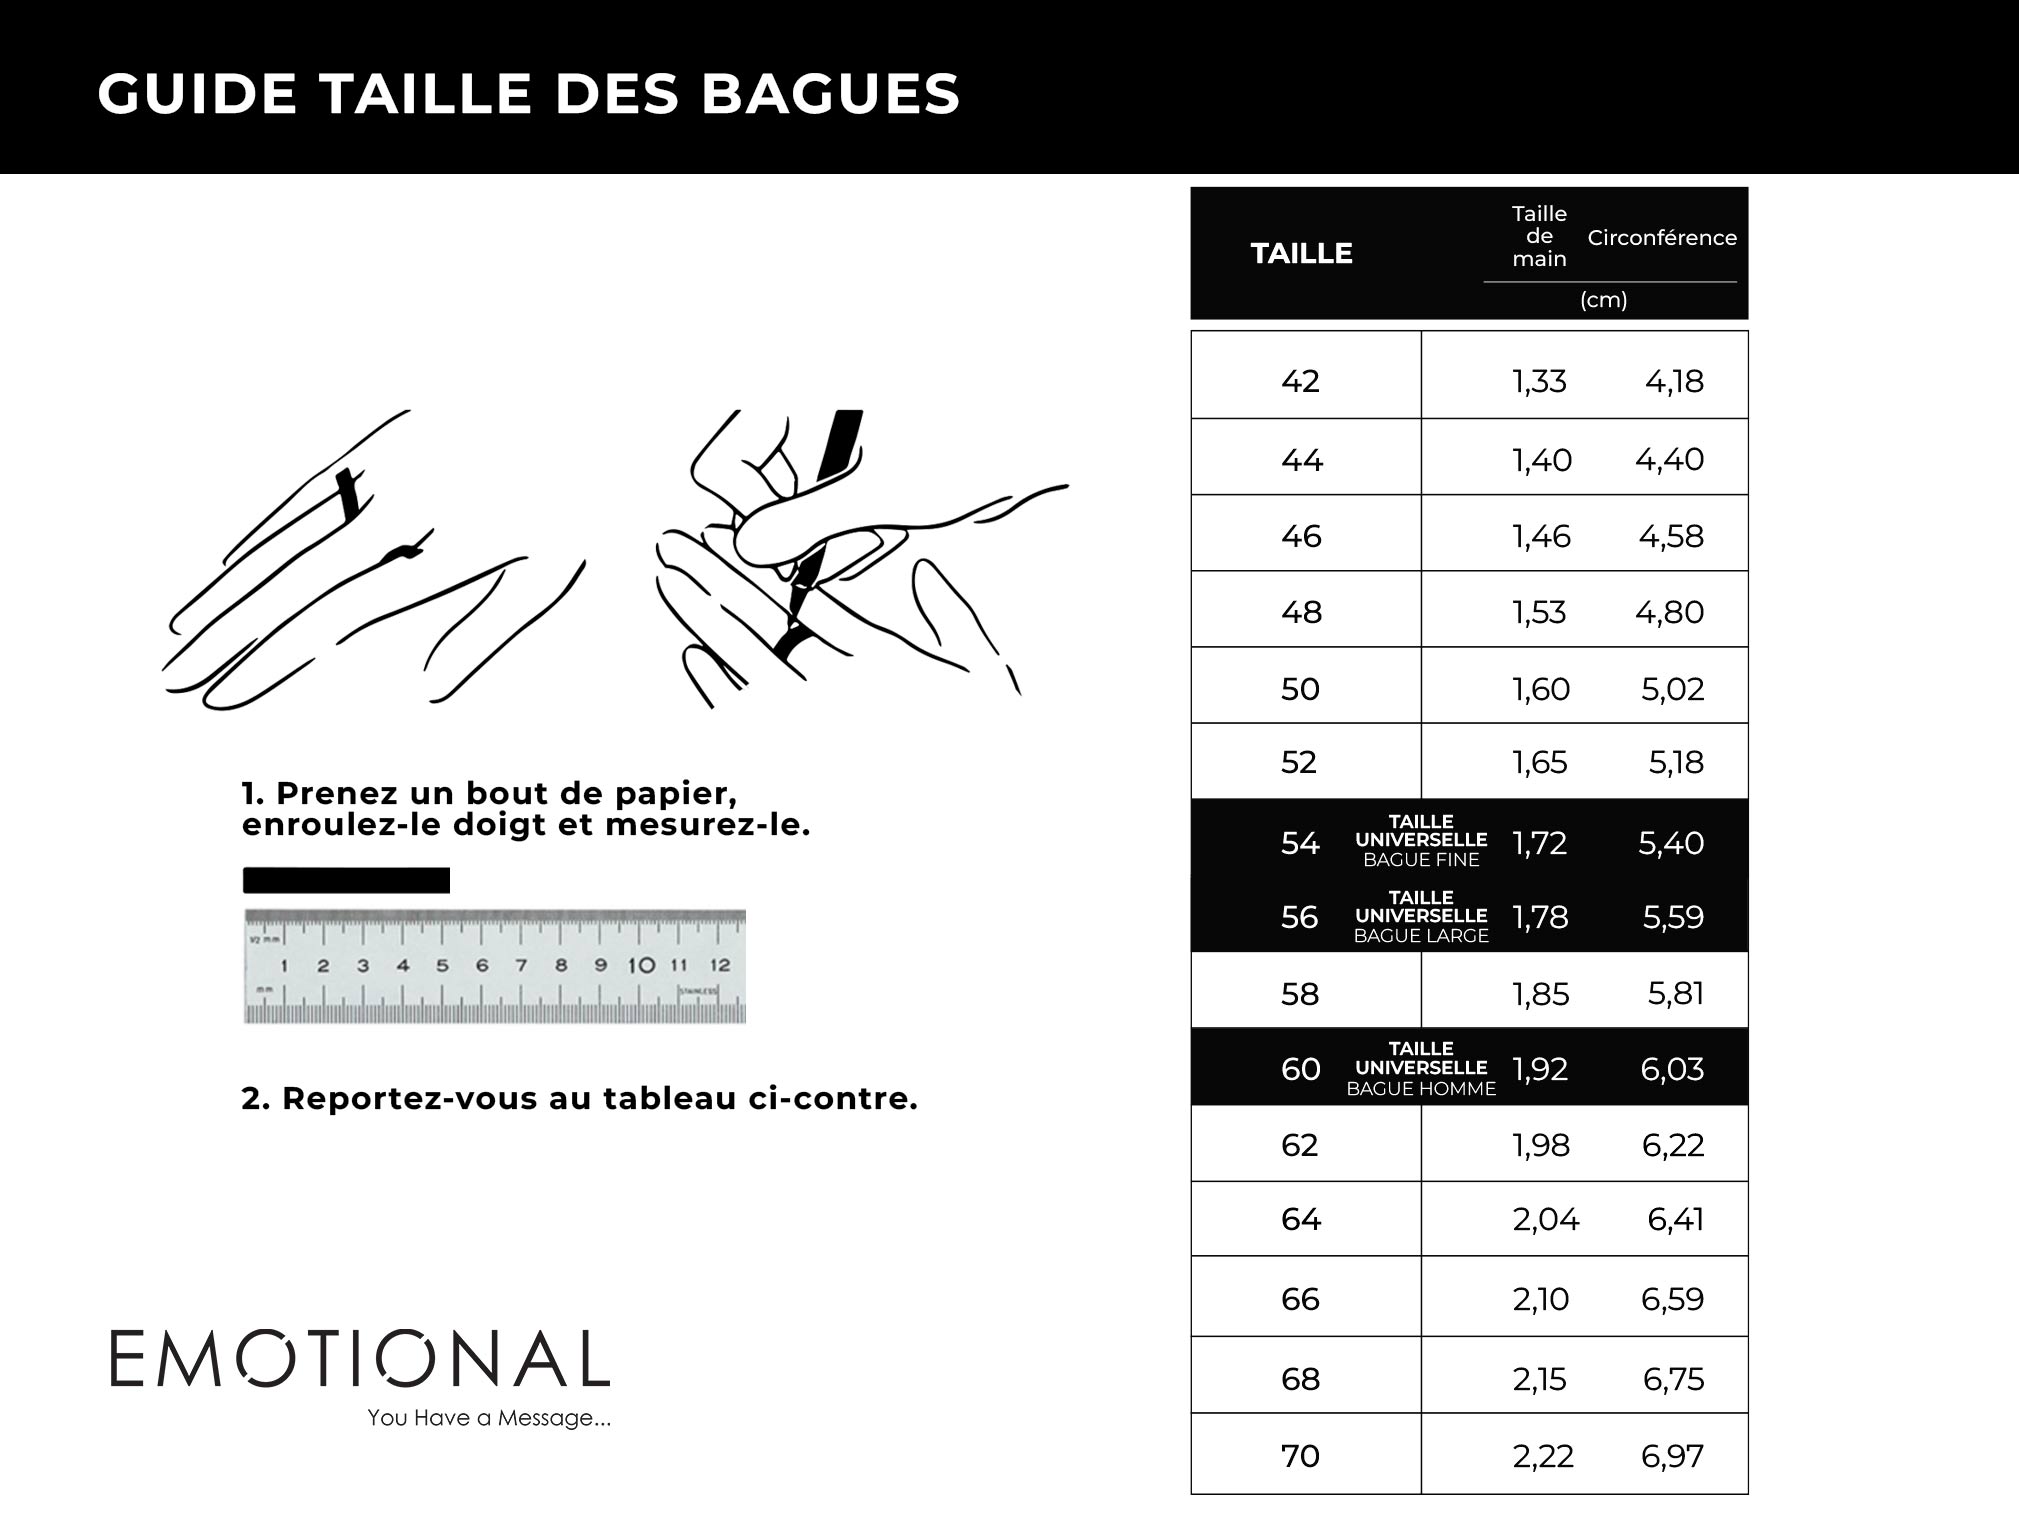 Guide taille bagues